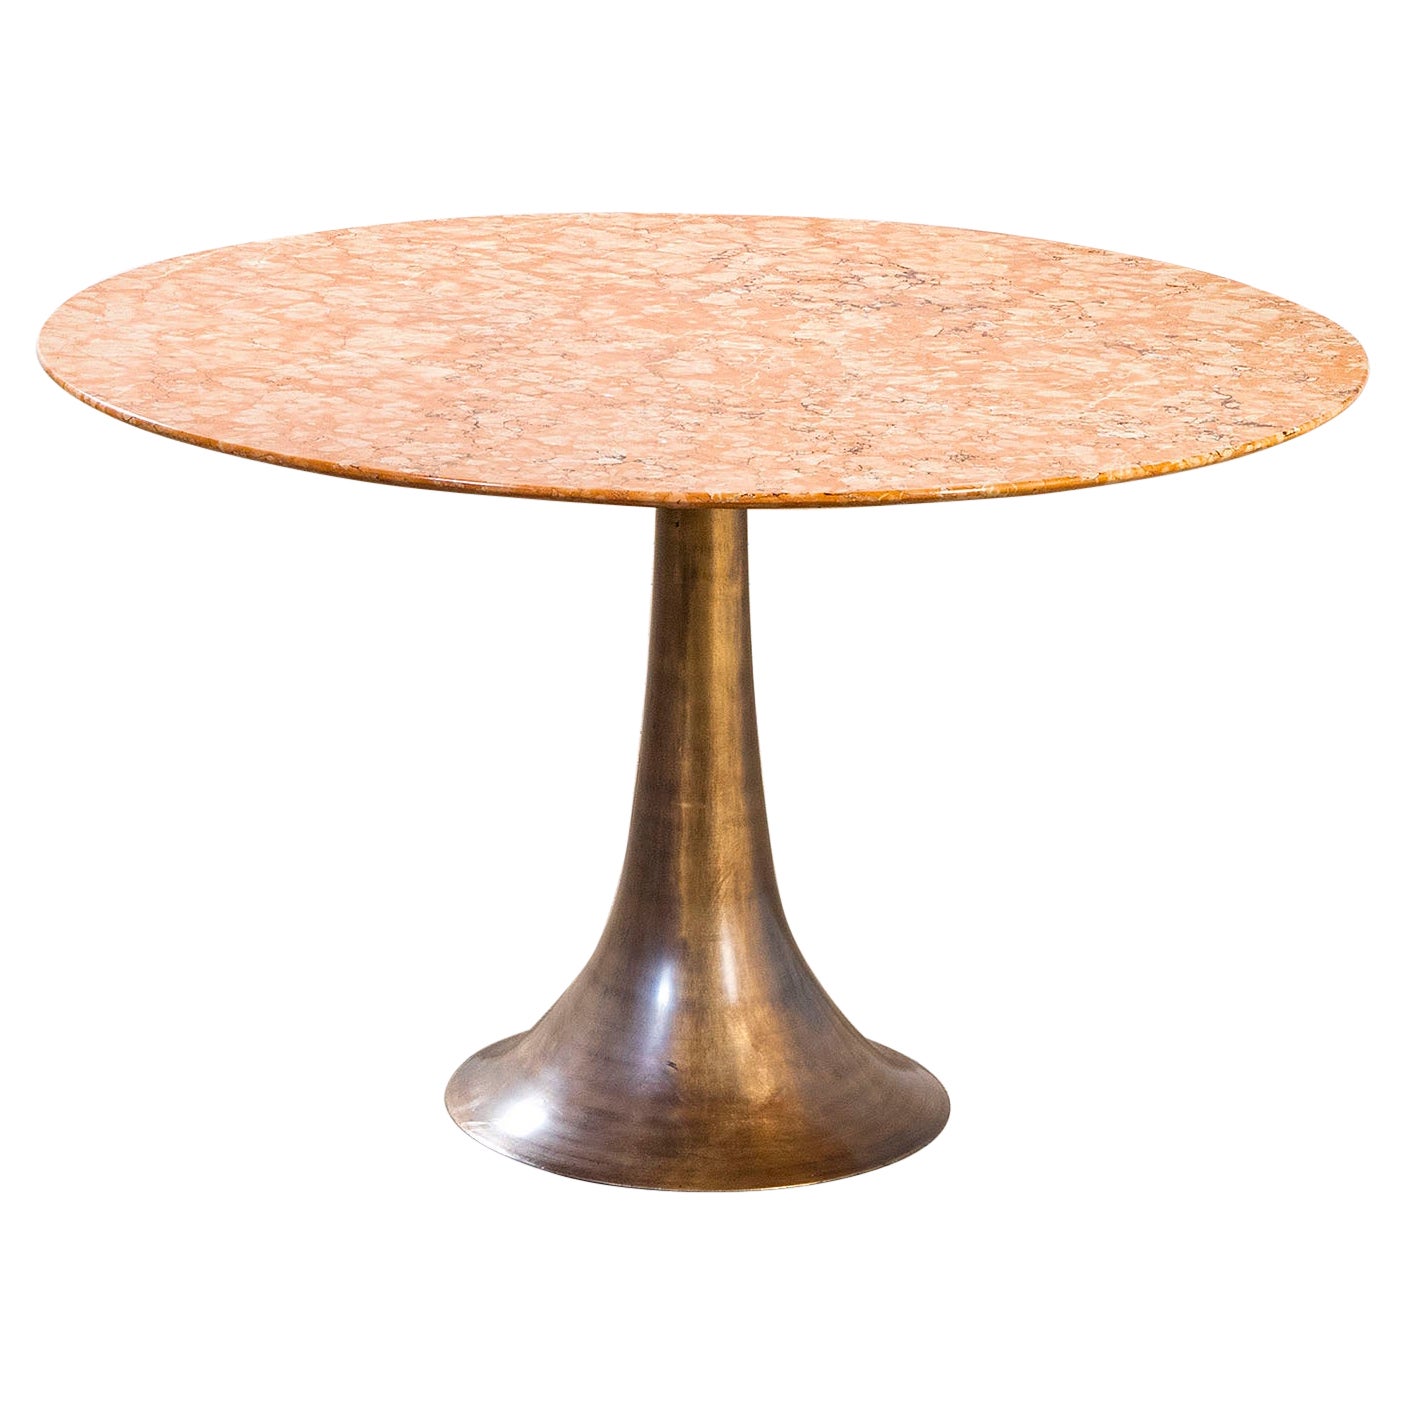 20th Century Angelo Mangiarotti Bernini Table Mod. 302 Brass and Marble, 50s For Sale